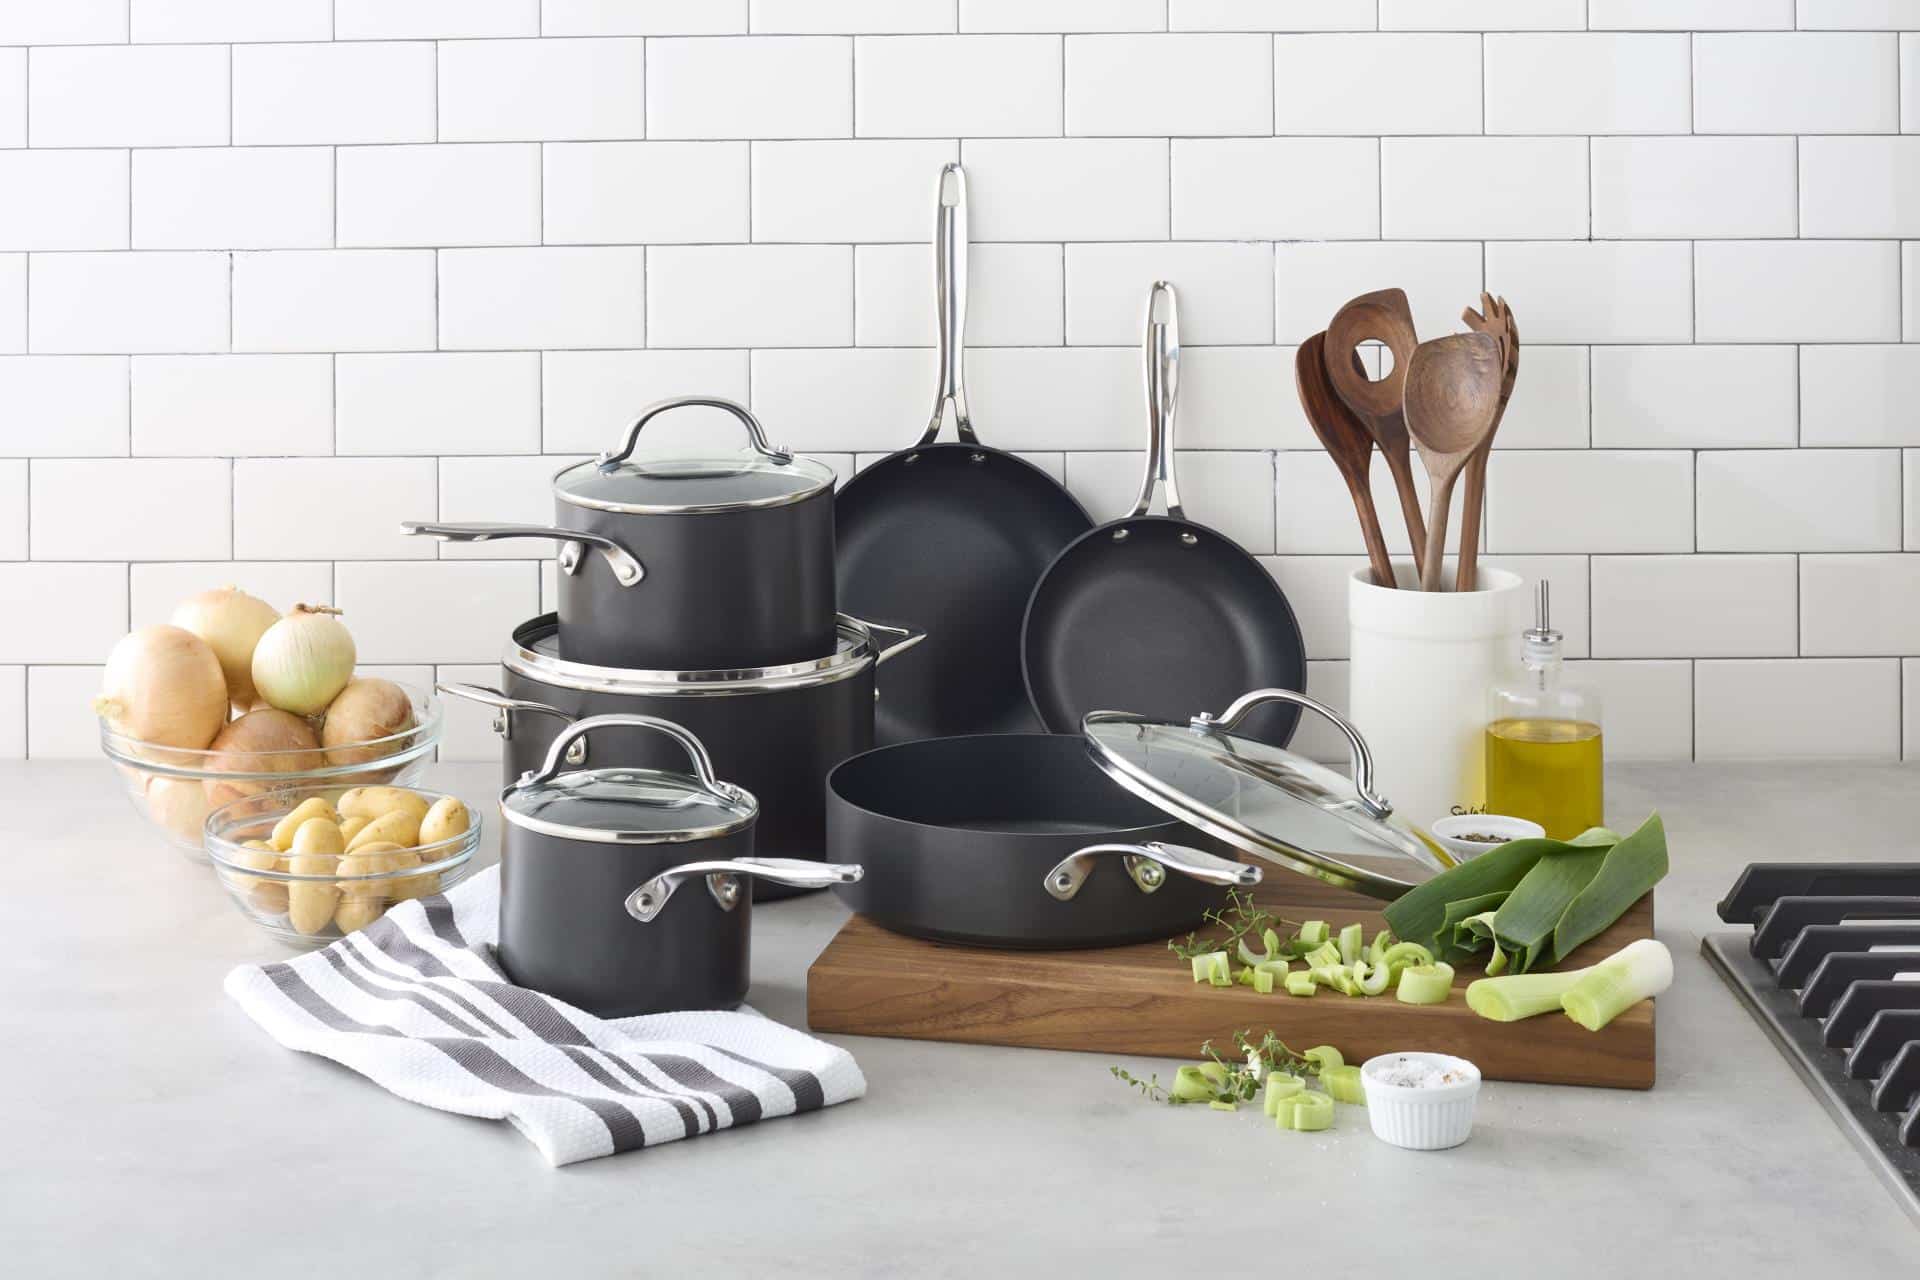 Hard Anodized Aluminum vs Ceramic: Pros and Cons Of This Nonstick Cookware